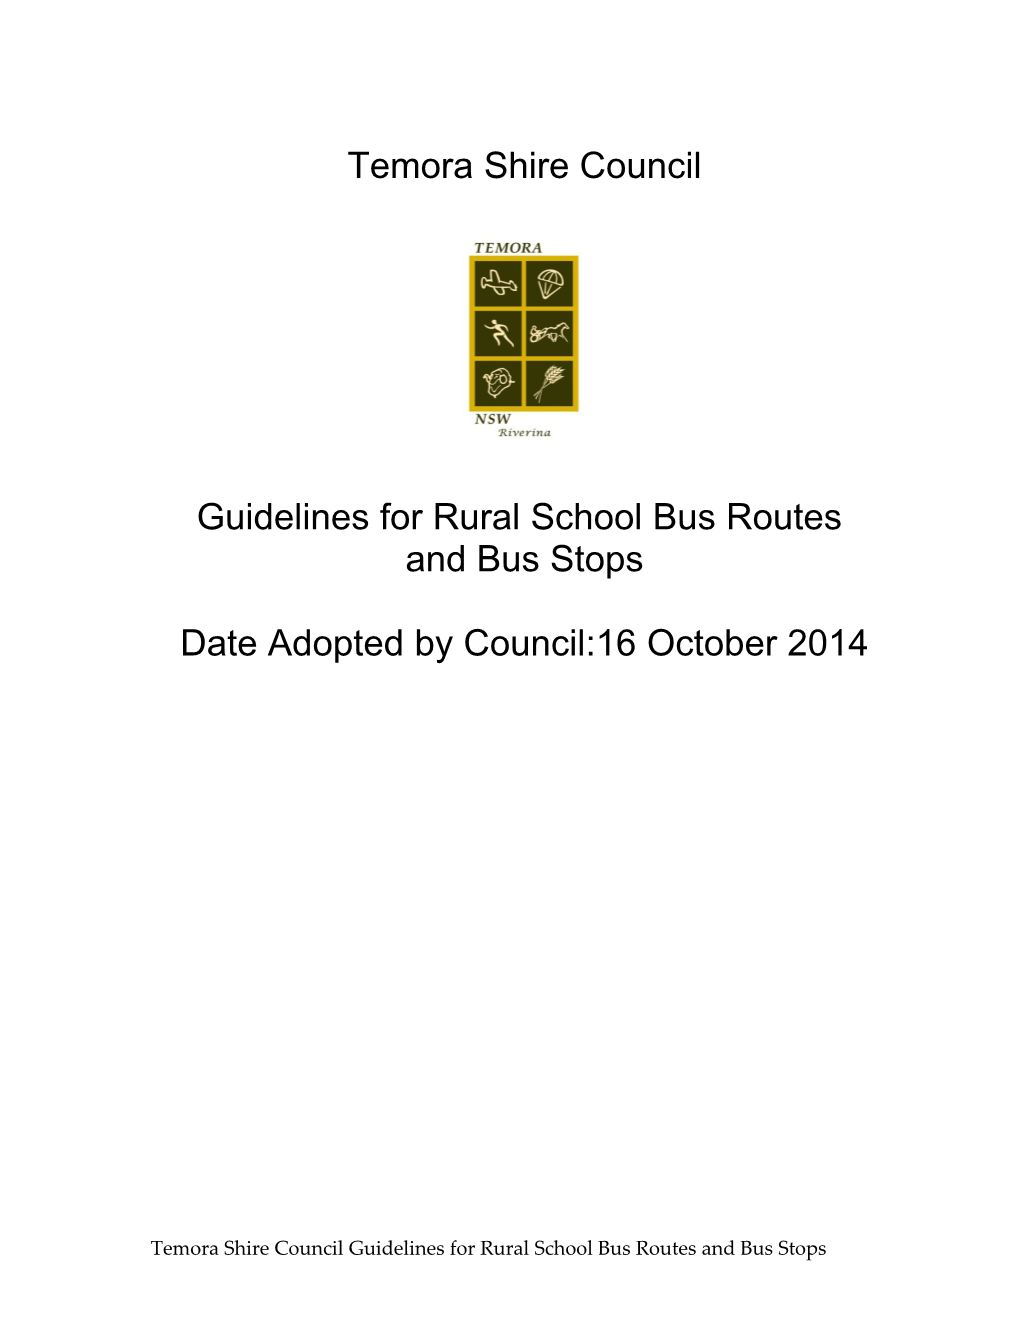 Temora Shire Council Guidelines for Rural School Bus Routes and Bus Stops